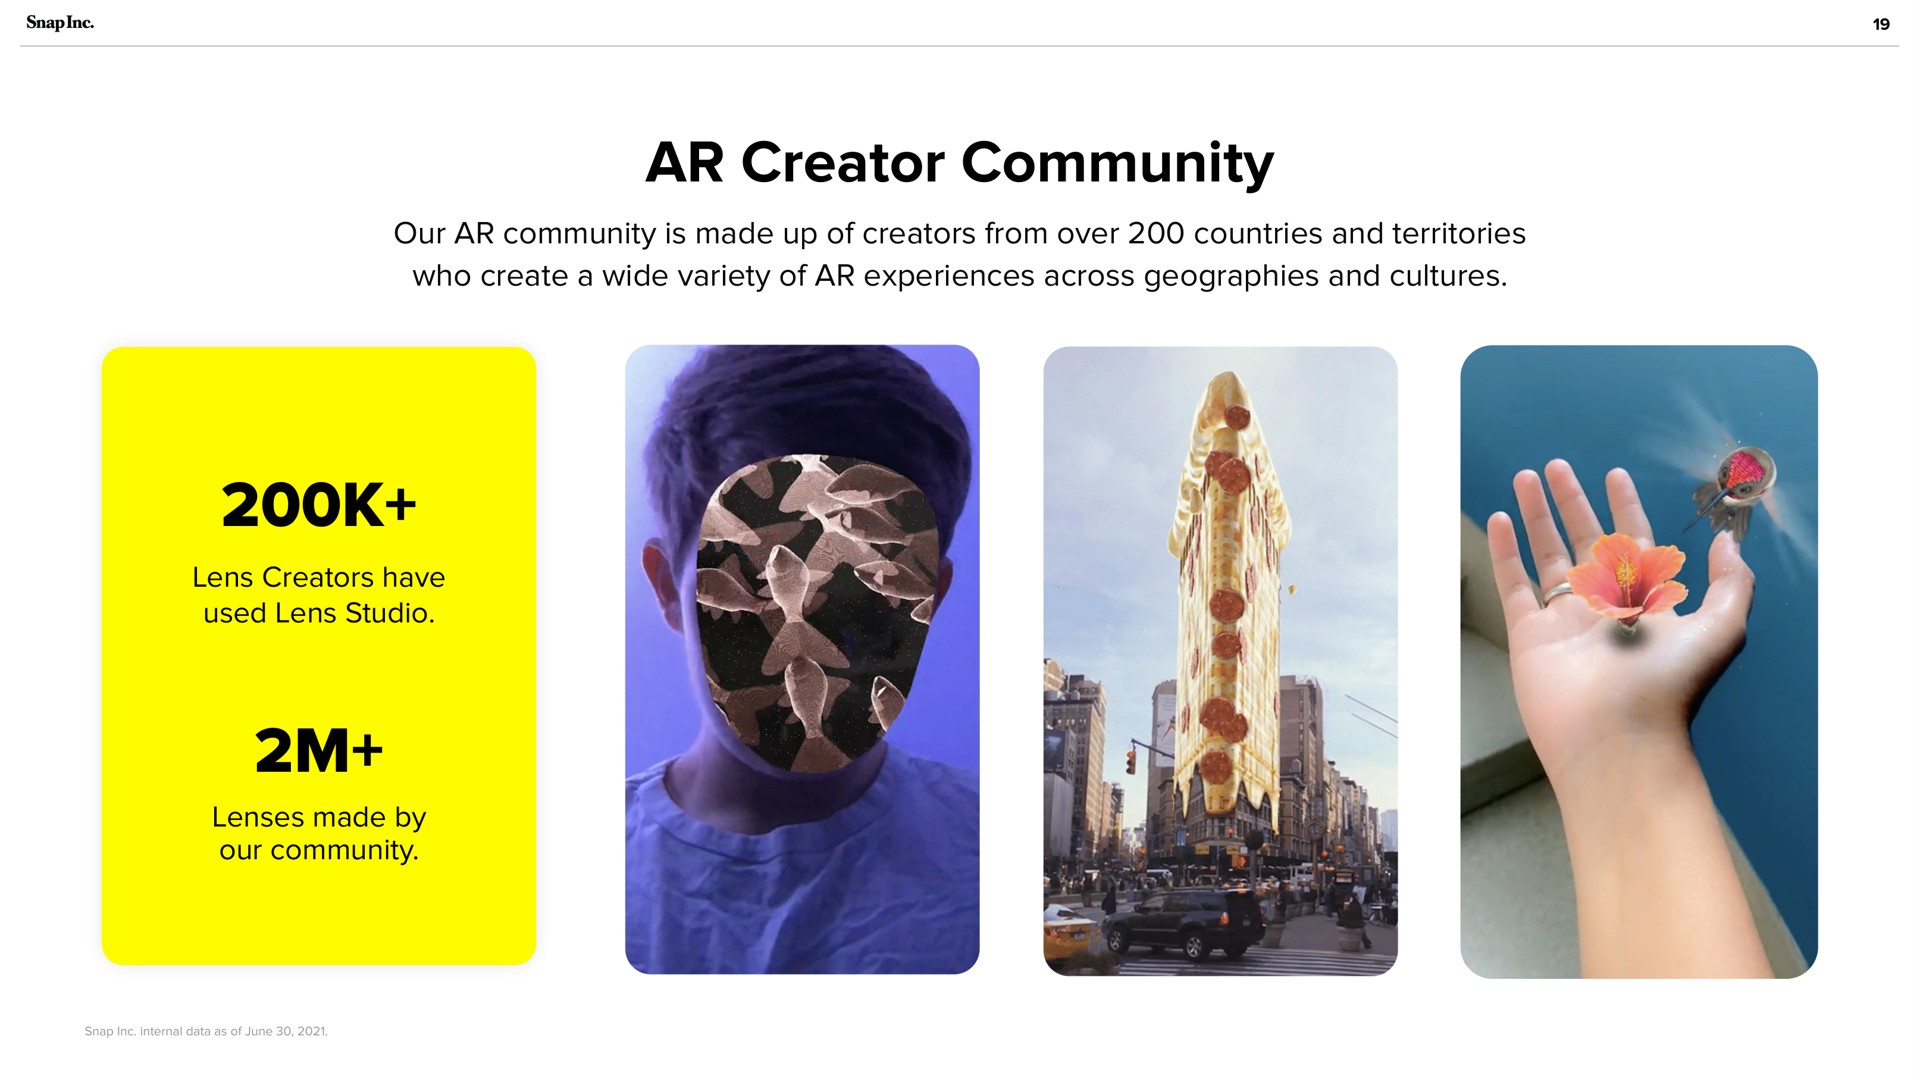 creator community our is made up of creators from over countries and territories who create a wide variety of experiences across geographies and cultures | Snap Inc